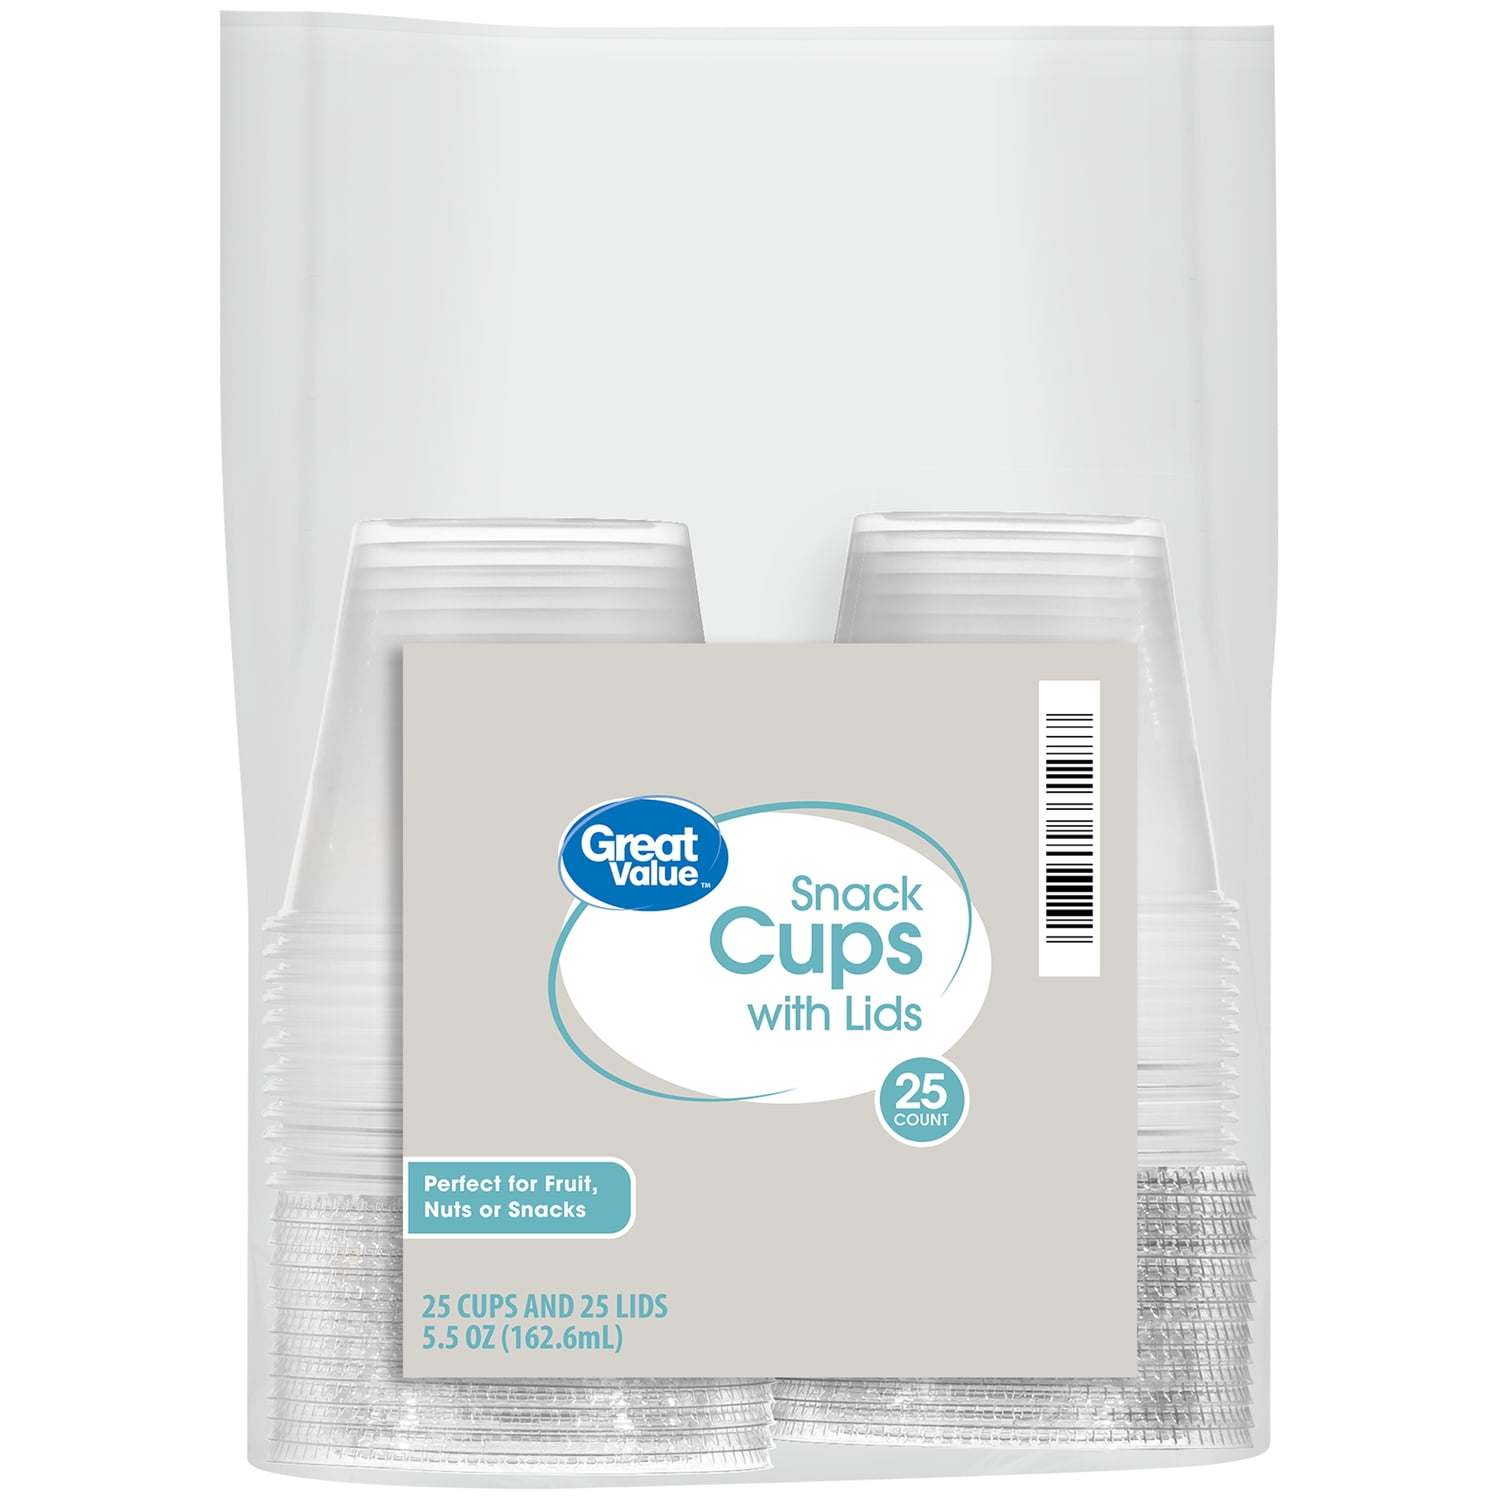 US$125.00-disposable cups easyinsmileDisposable PAPER CUP 5oz 7oz